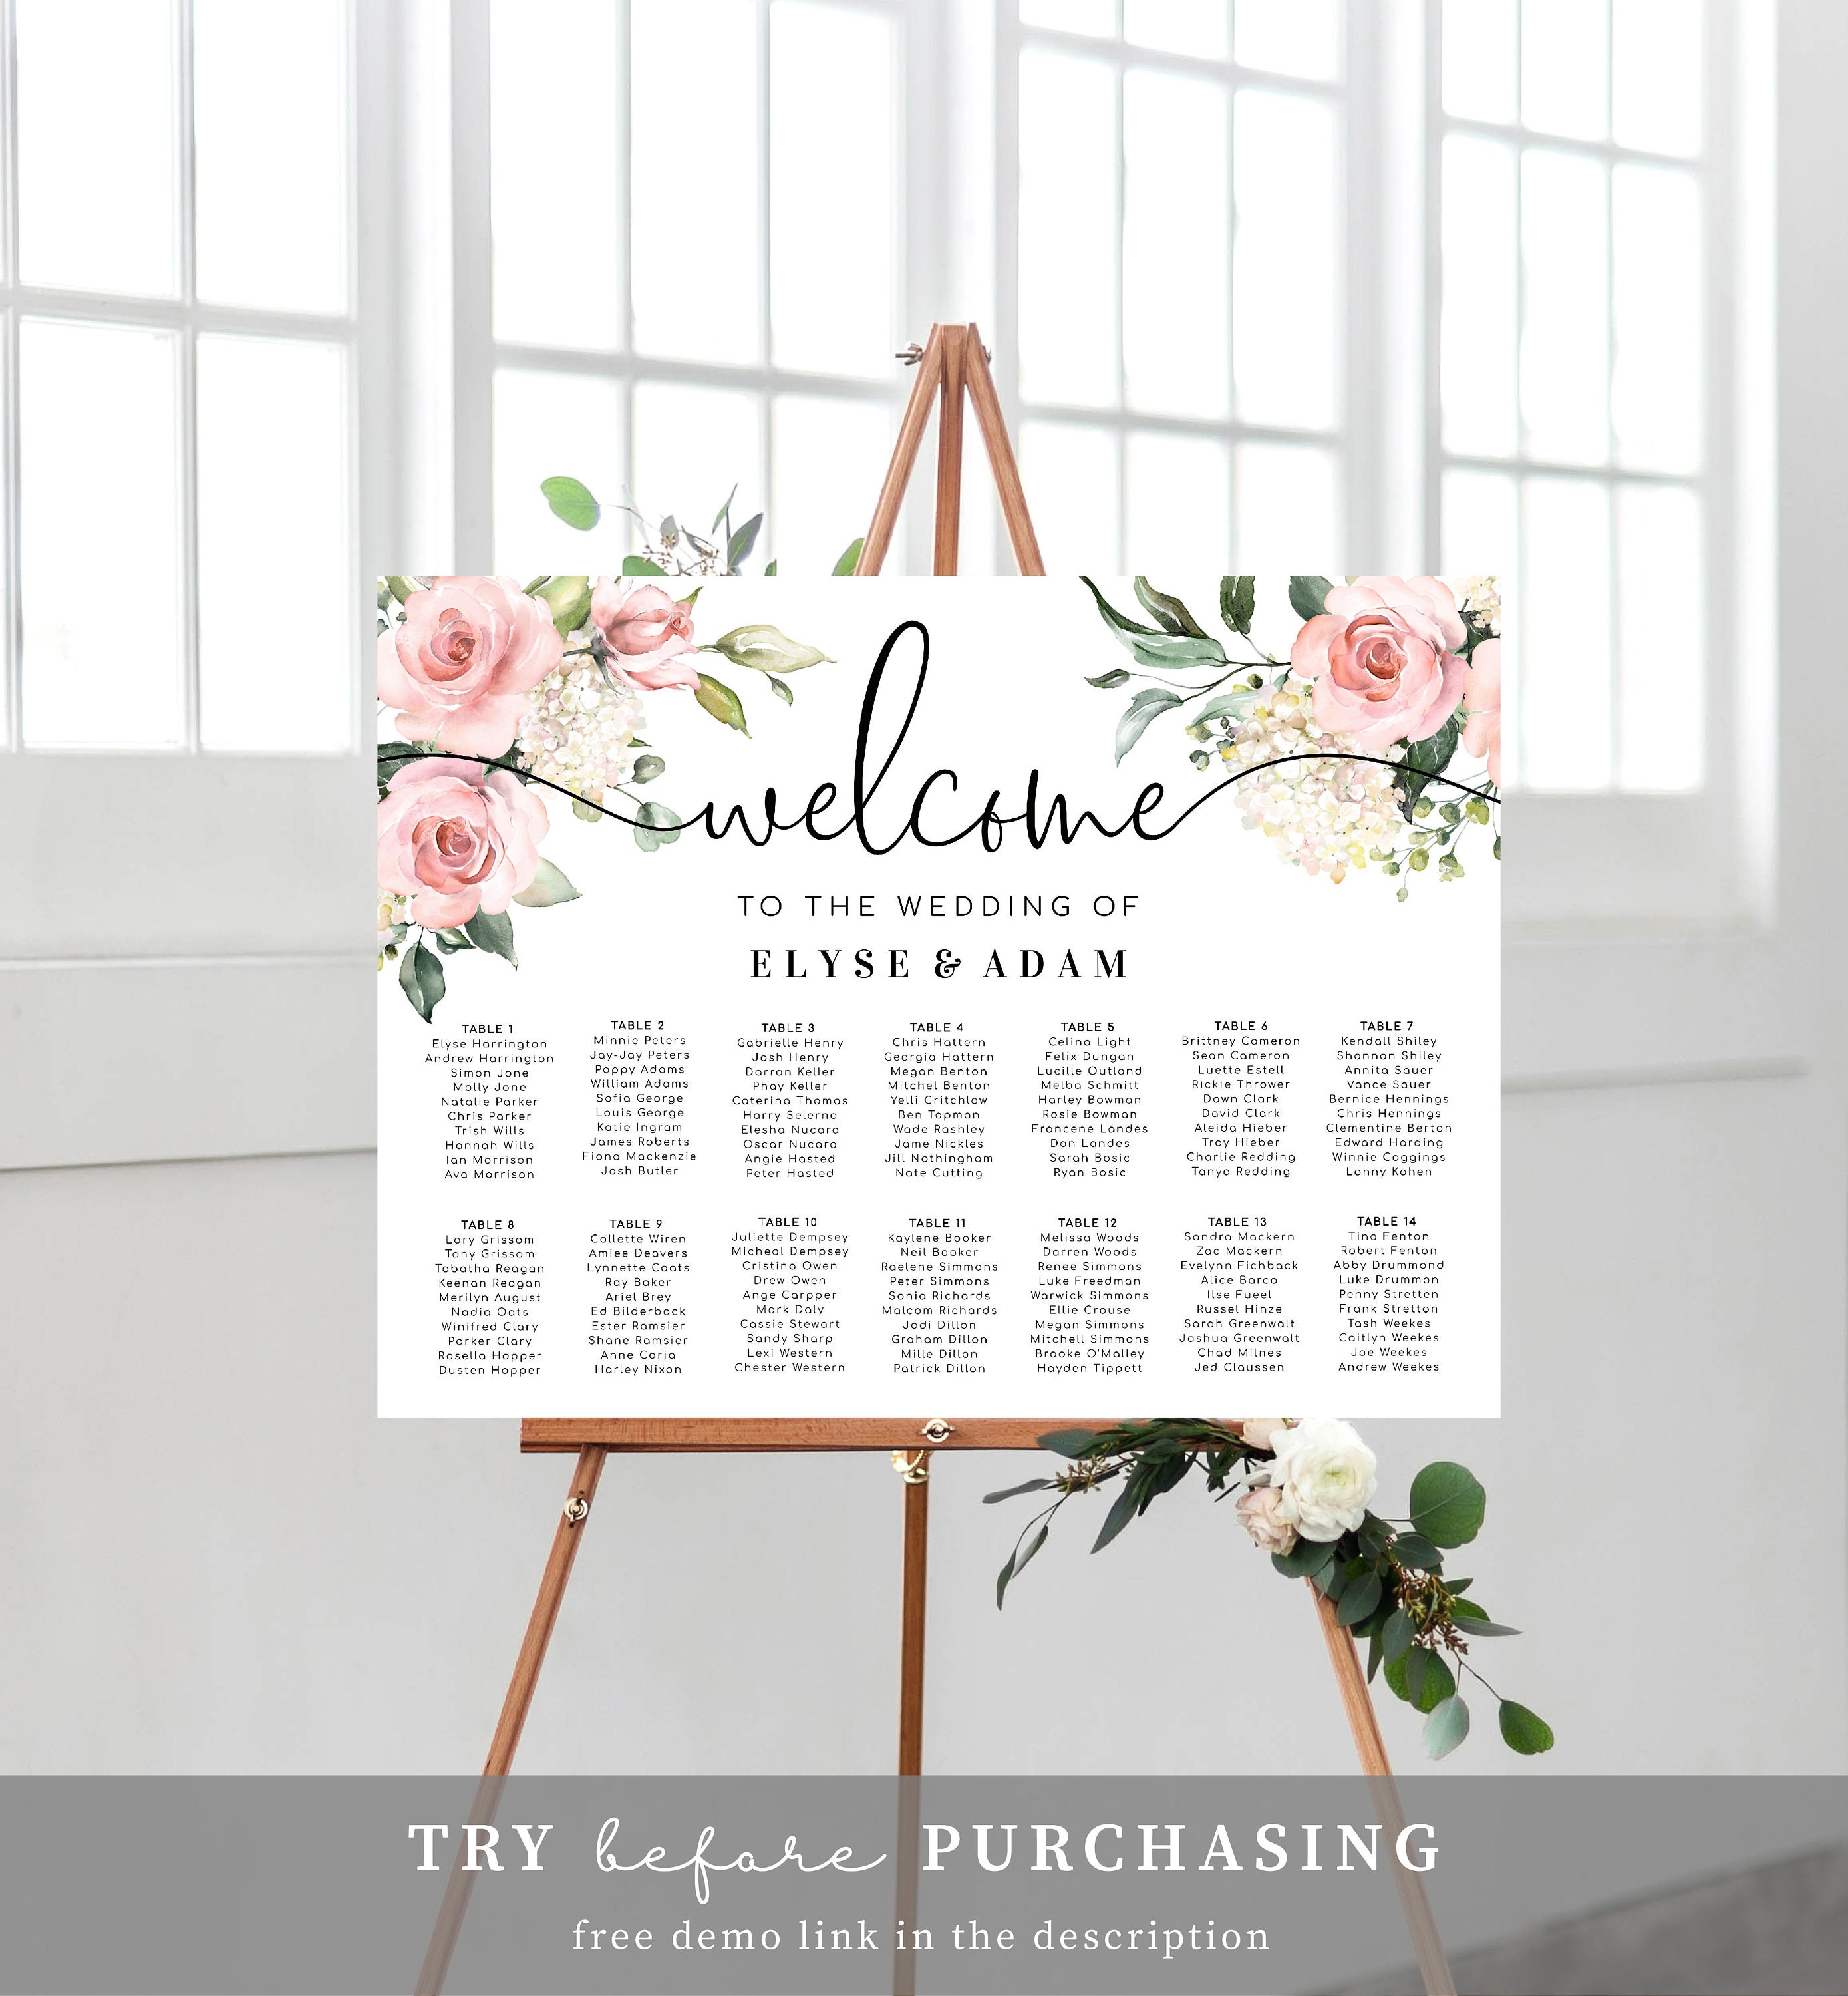 Table Plan Instant download Printable SU029 Find your seat Sign EDITABLE Seating Chart Corjl Template Blush Pink Floral